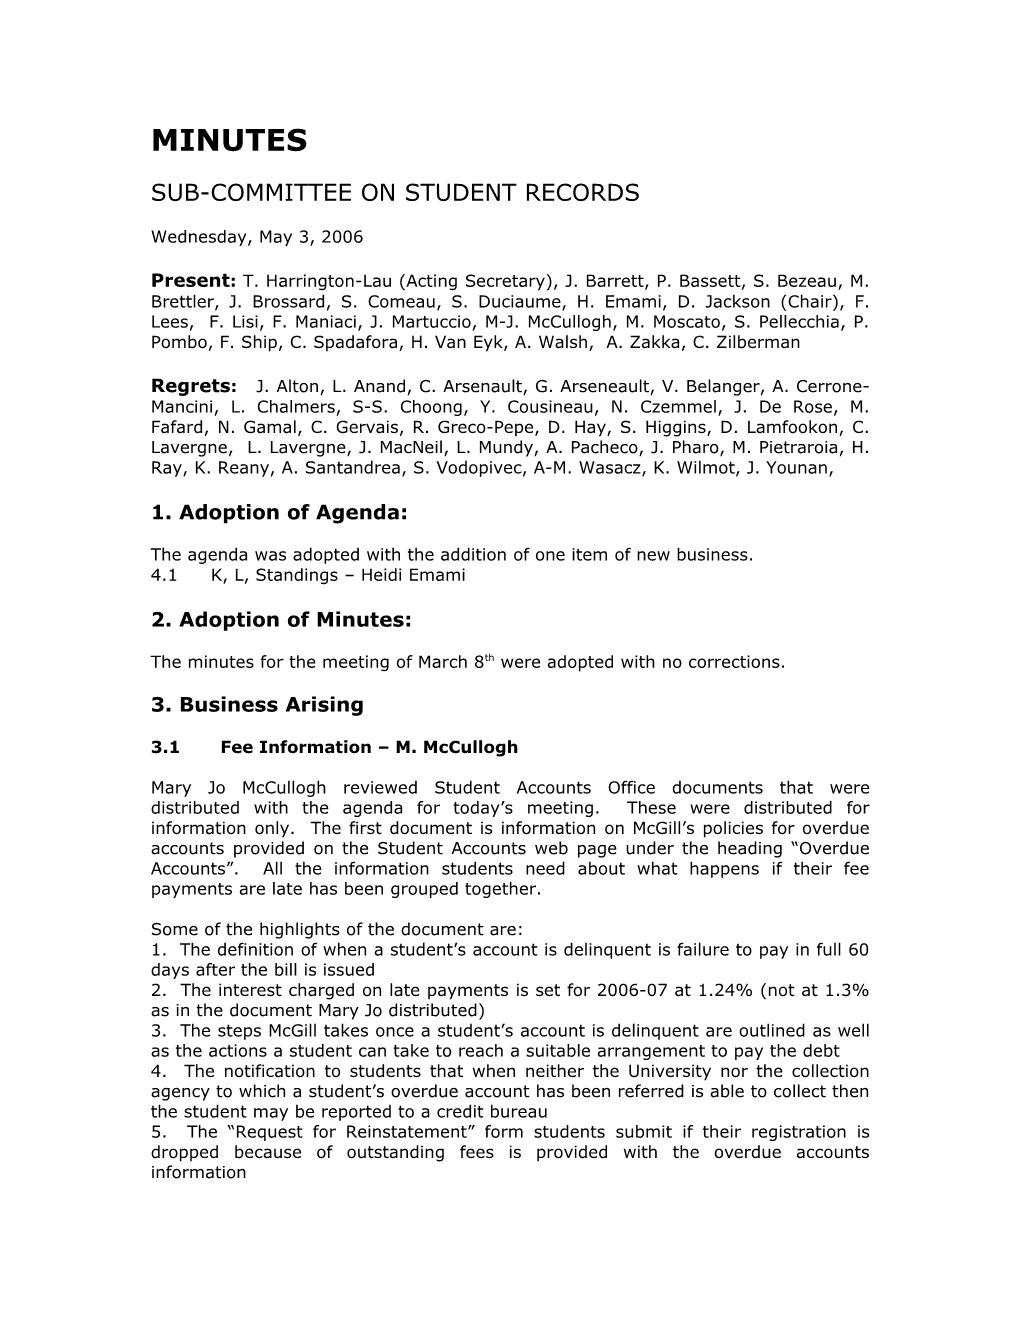 Sub-Committee on Student Records